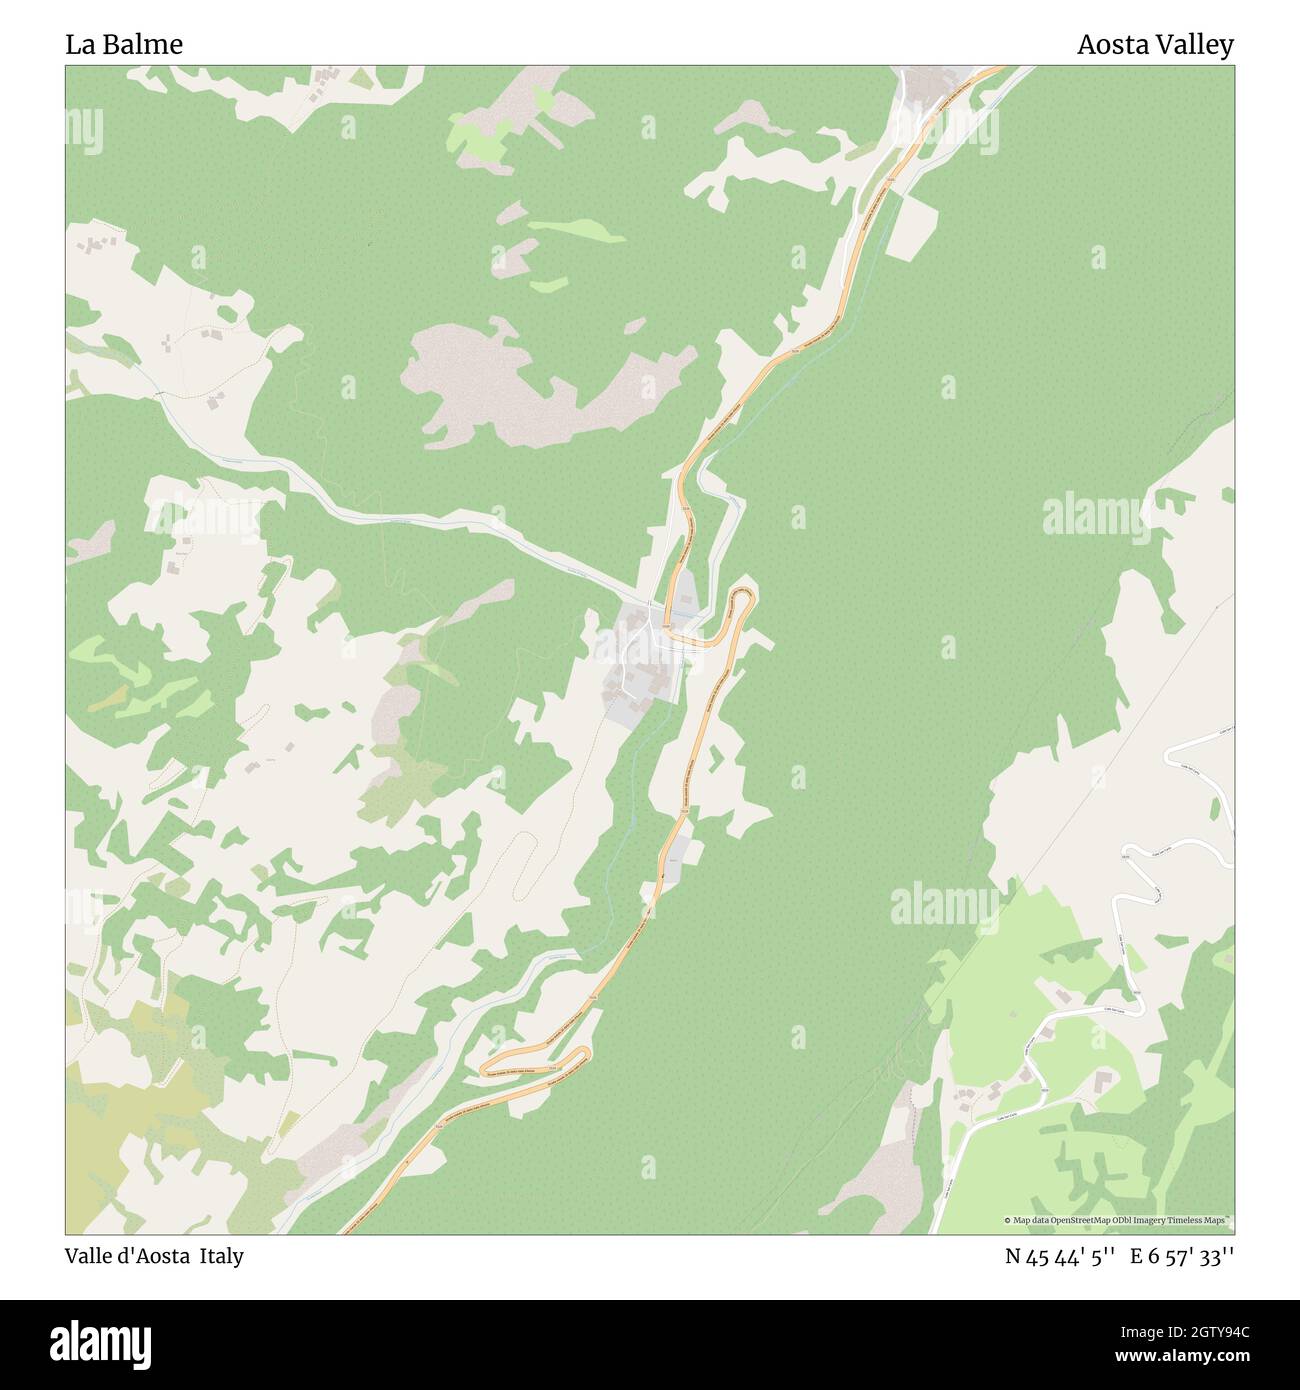 La Balme, Valle d'Aosta, Italy, Aosta Valley, N 45 44' 5'', E 6 57' 33'', map, Timeless Map published in 2021. Travelers, explorers and adventurers like Florence Nightingale, David Livingstone, Ernest Shackleton, Lewis and Clark and Sherlock Holmes relied on maps to plan travels to the world's most remote corners, Timeless Maps is mapping most locations on the globe, showing the achievement of great dreams Stock Photo